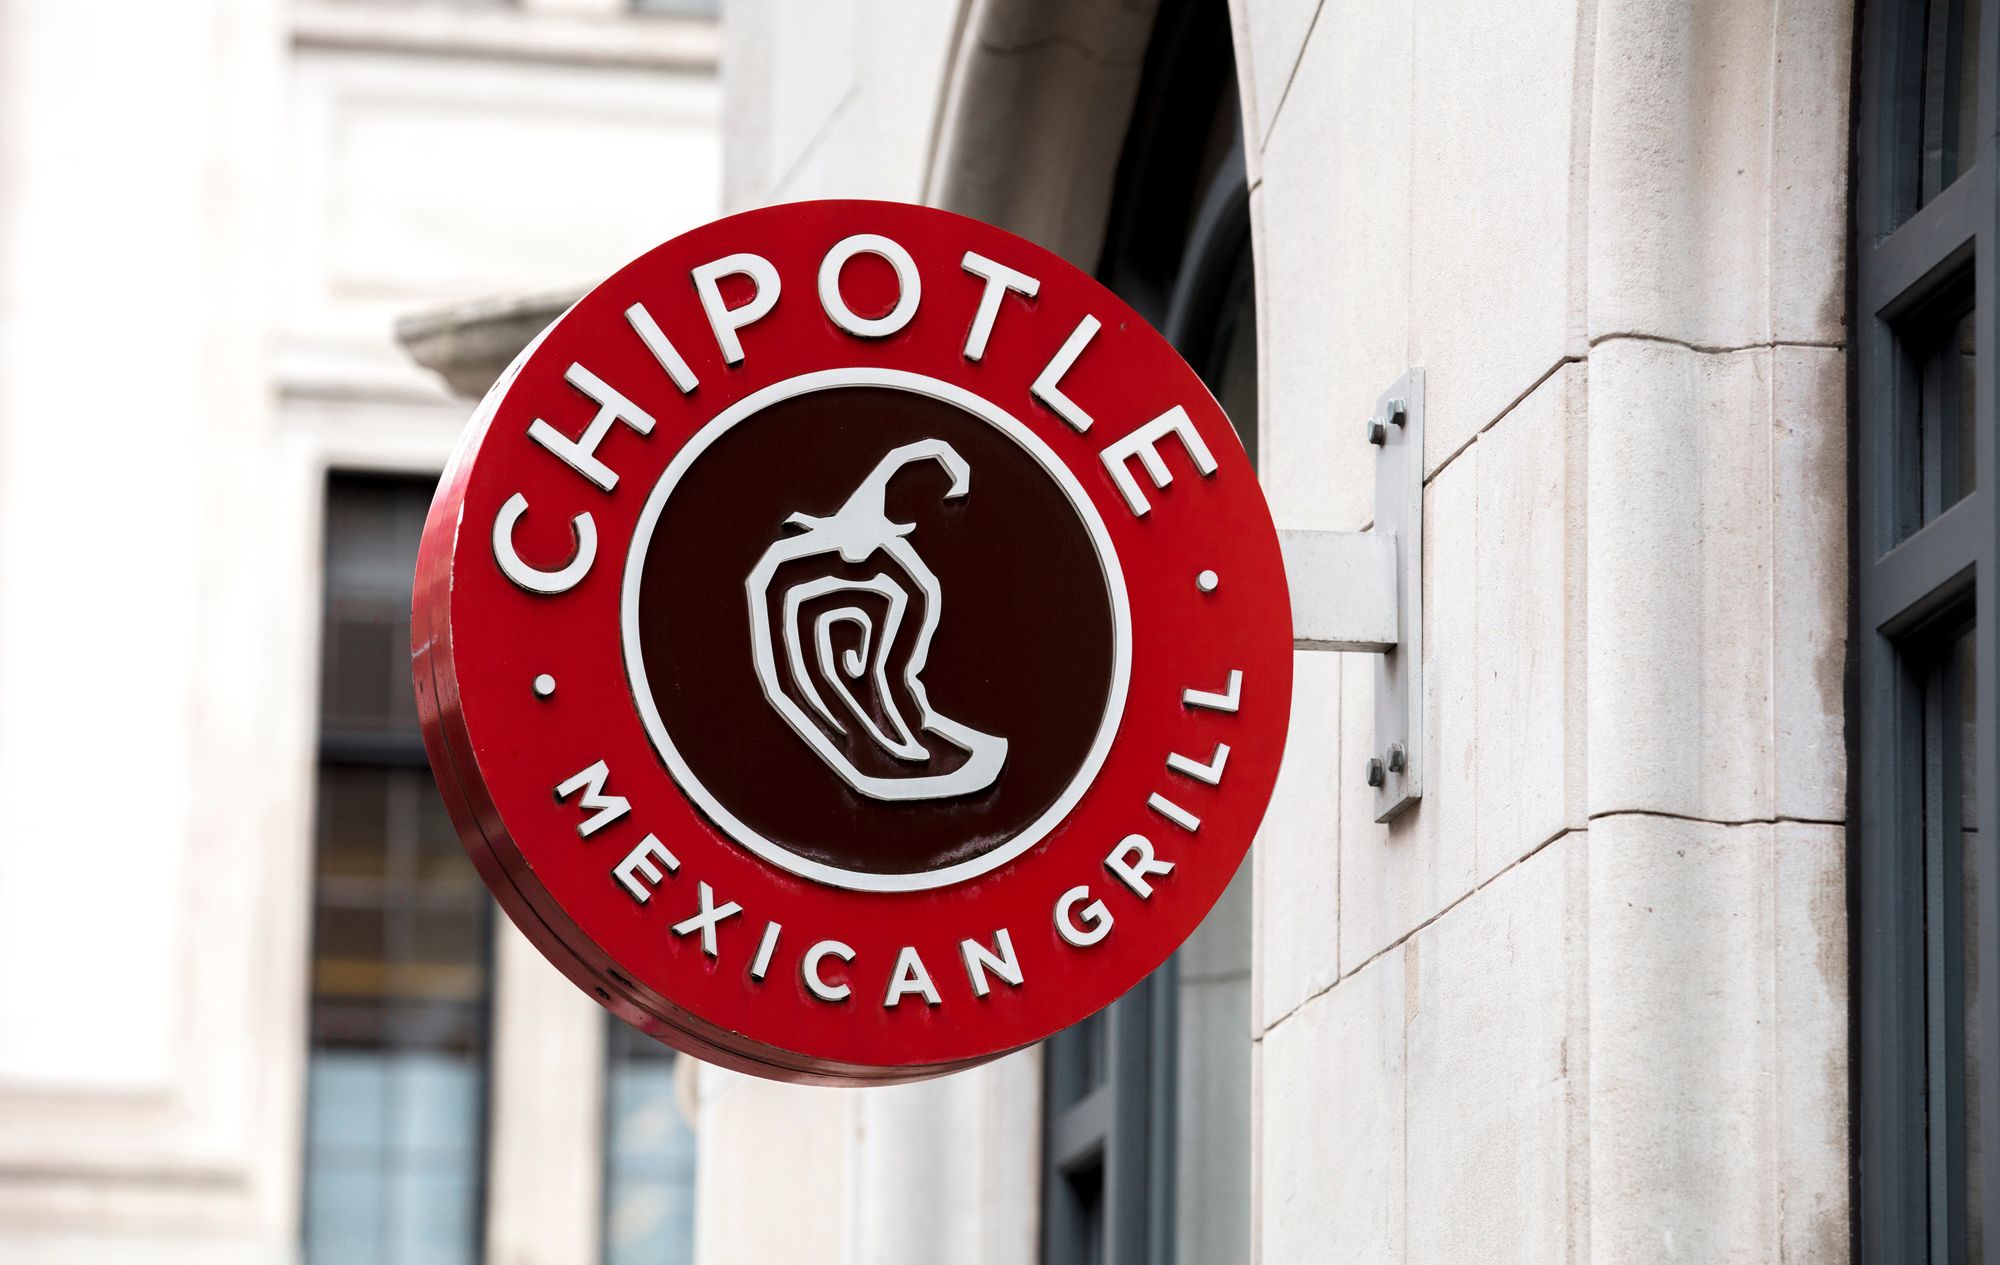 Chipotle's $240,000 Settlement: A Win for Workers in Unionization Battle